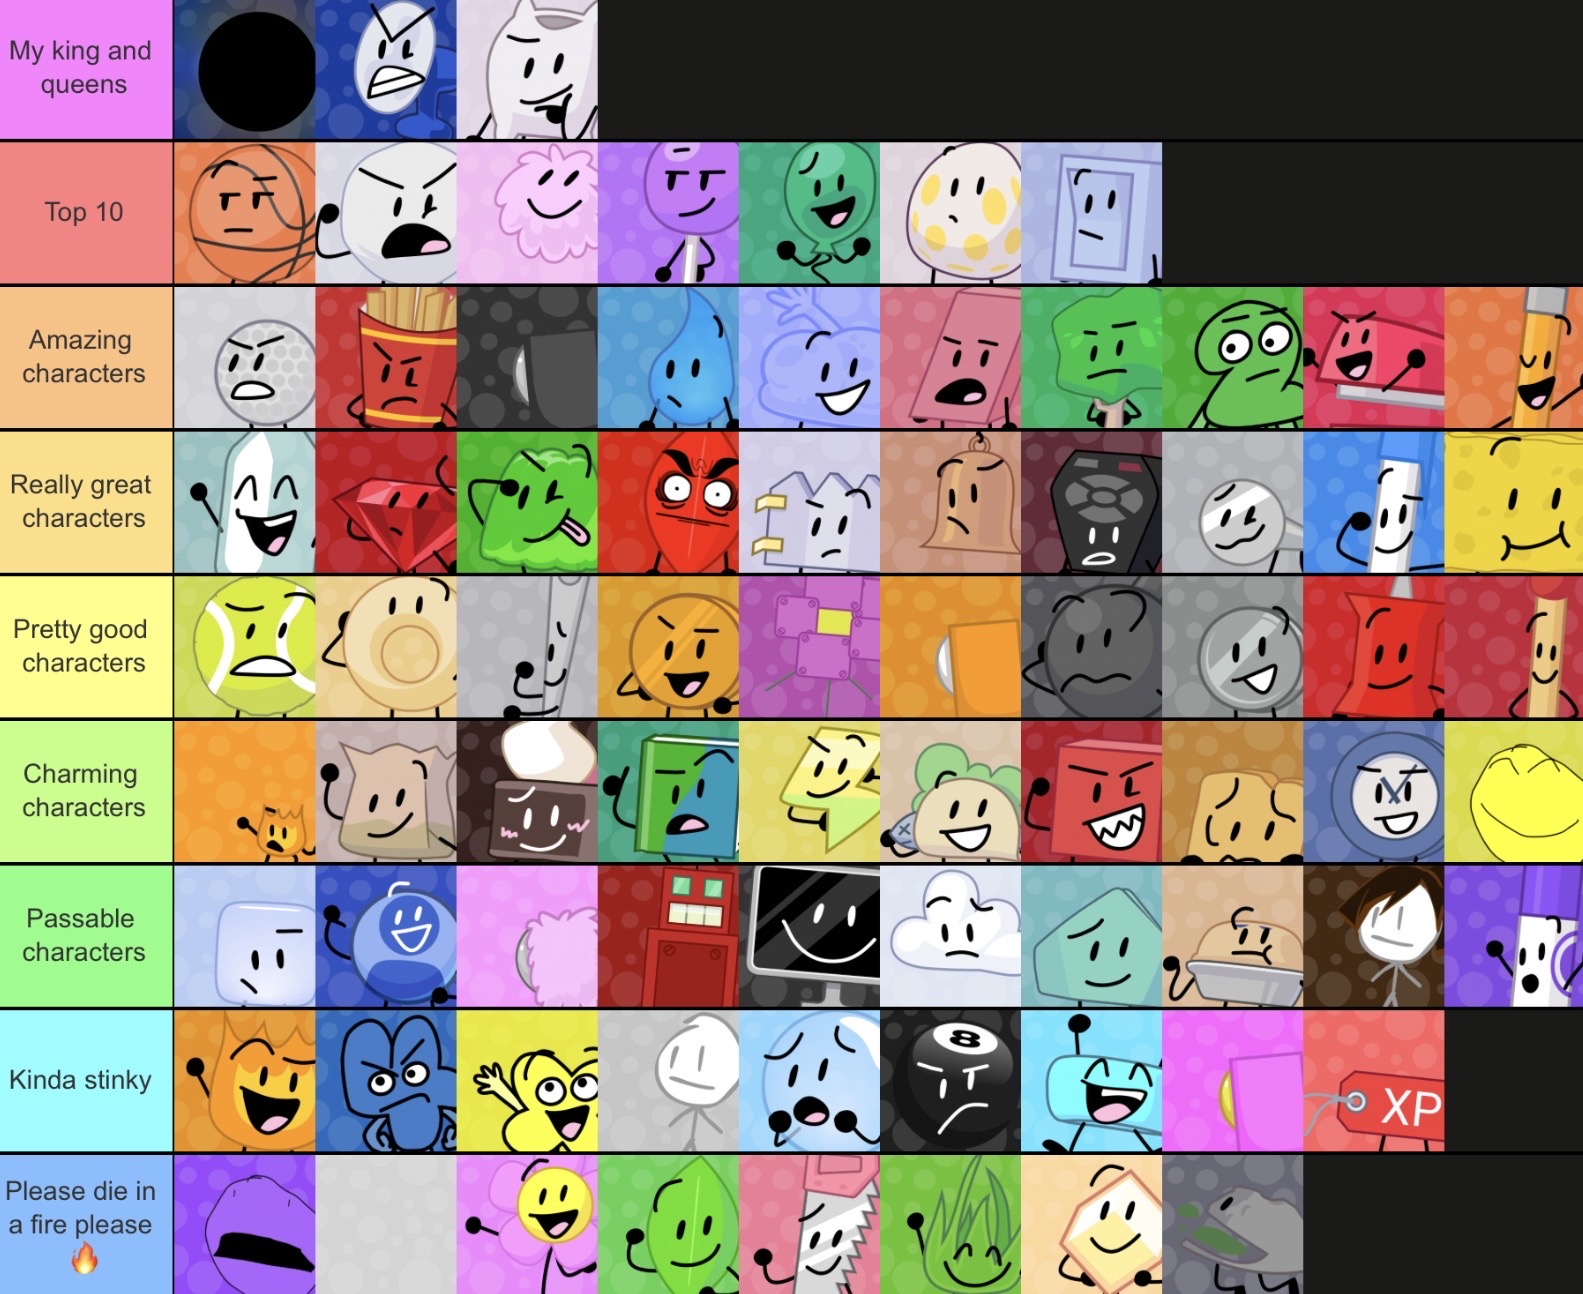 My updated BFDI tier list as of BFDIA 7 by MrDoyle2763 on DeviantArt